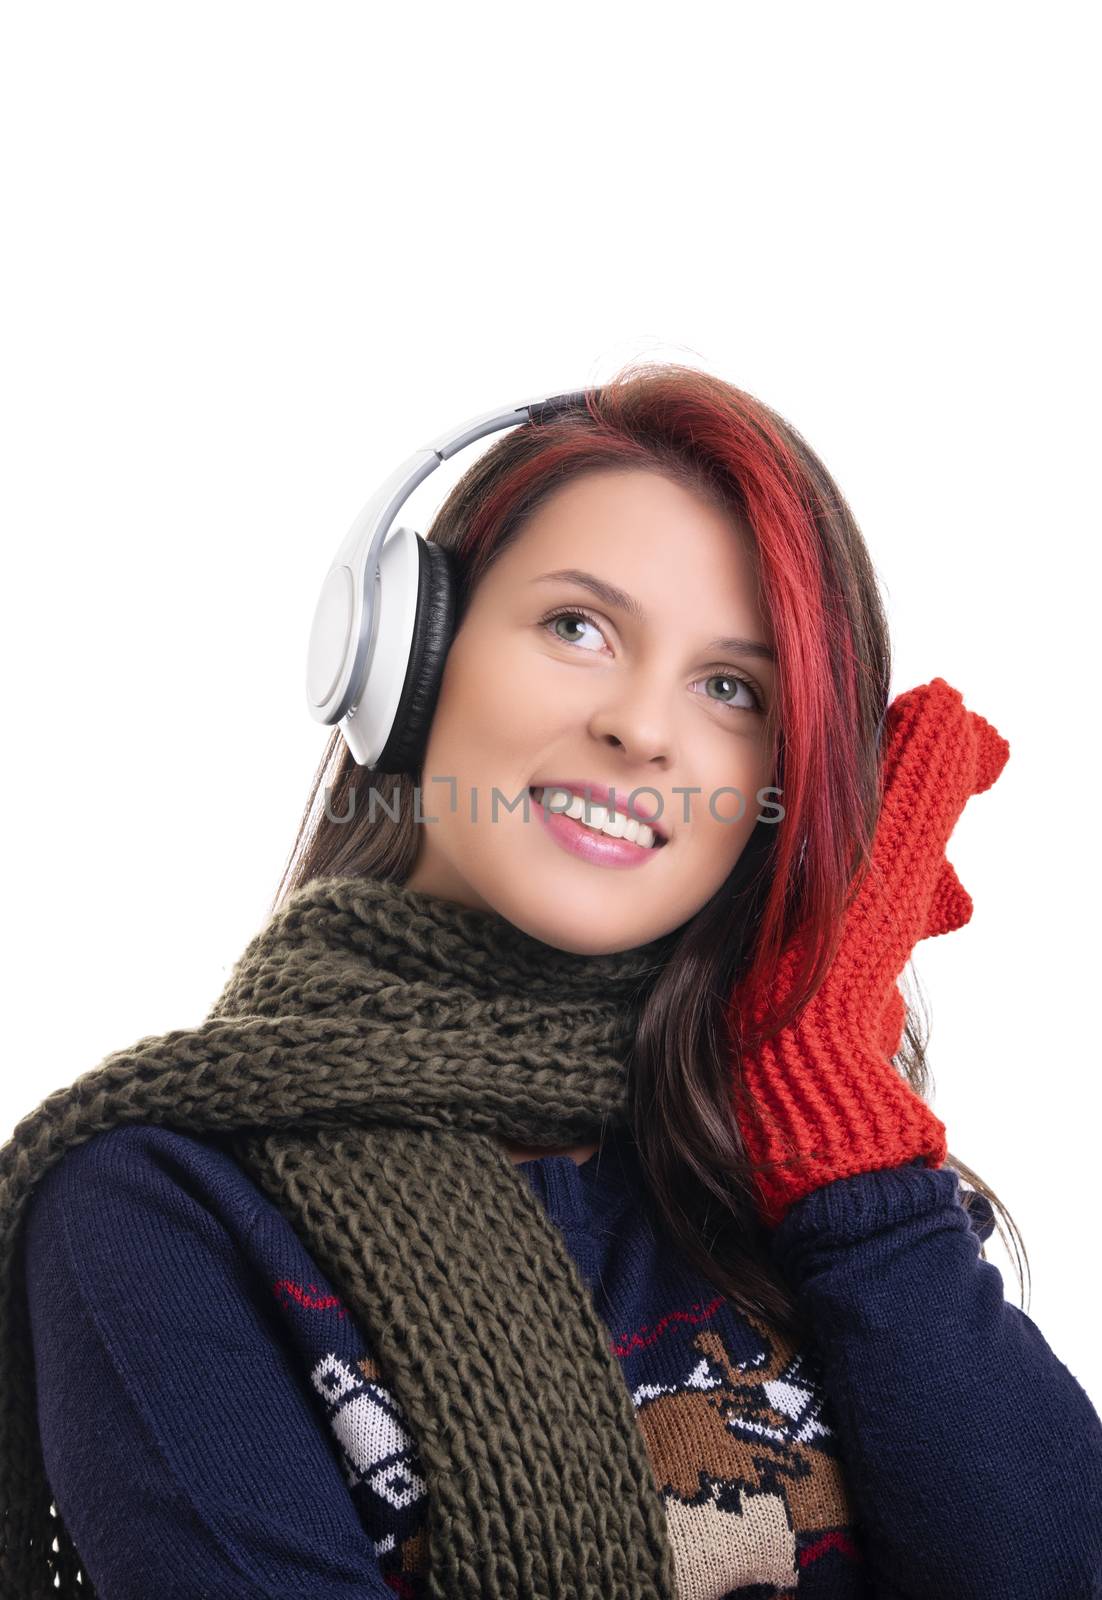 Beautiful smiling young girl with scarf and mittens listening to music on her headphones, isolated on white background.